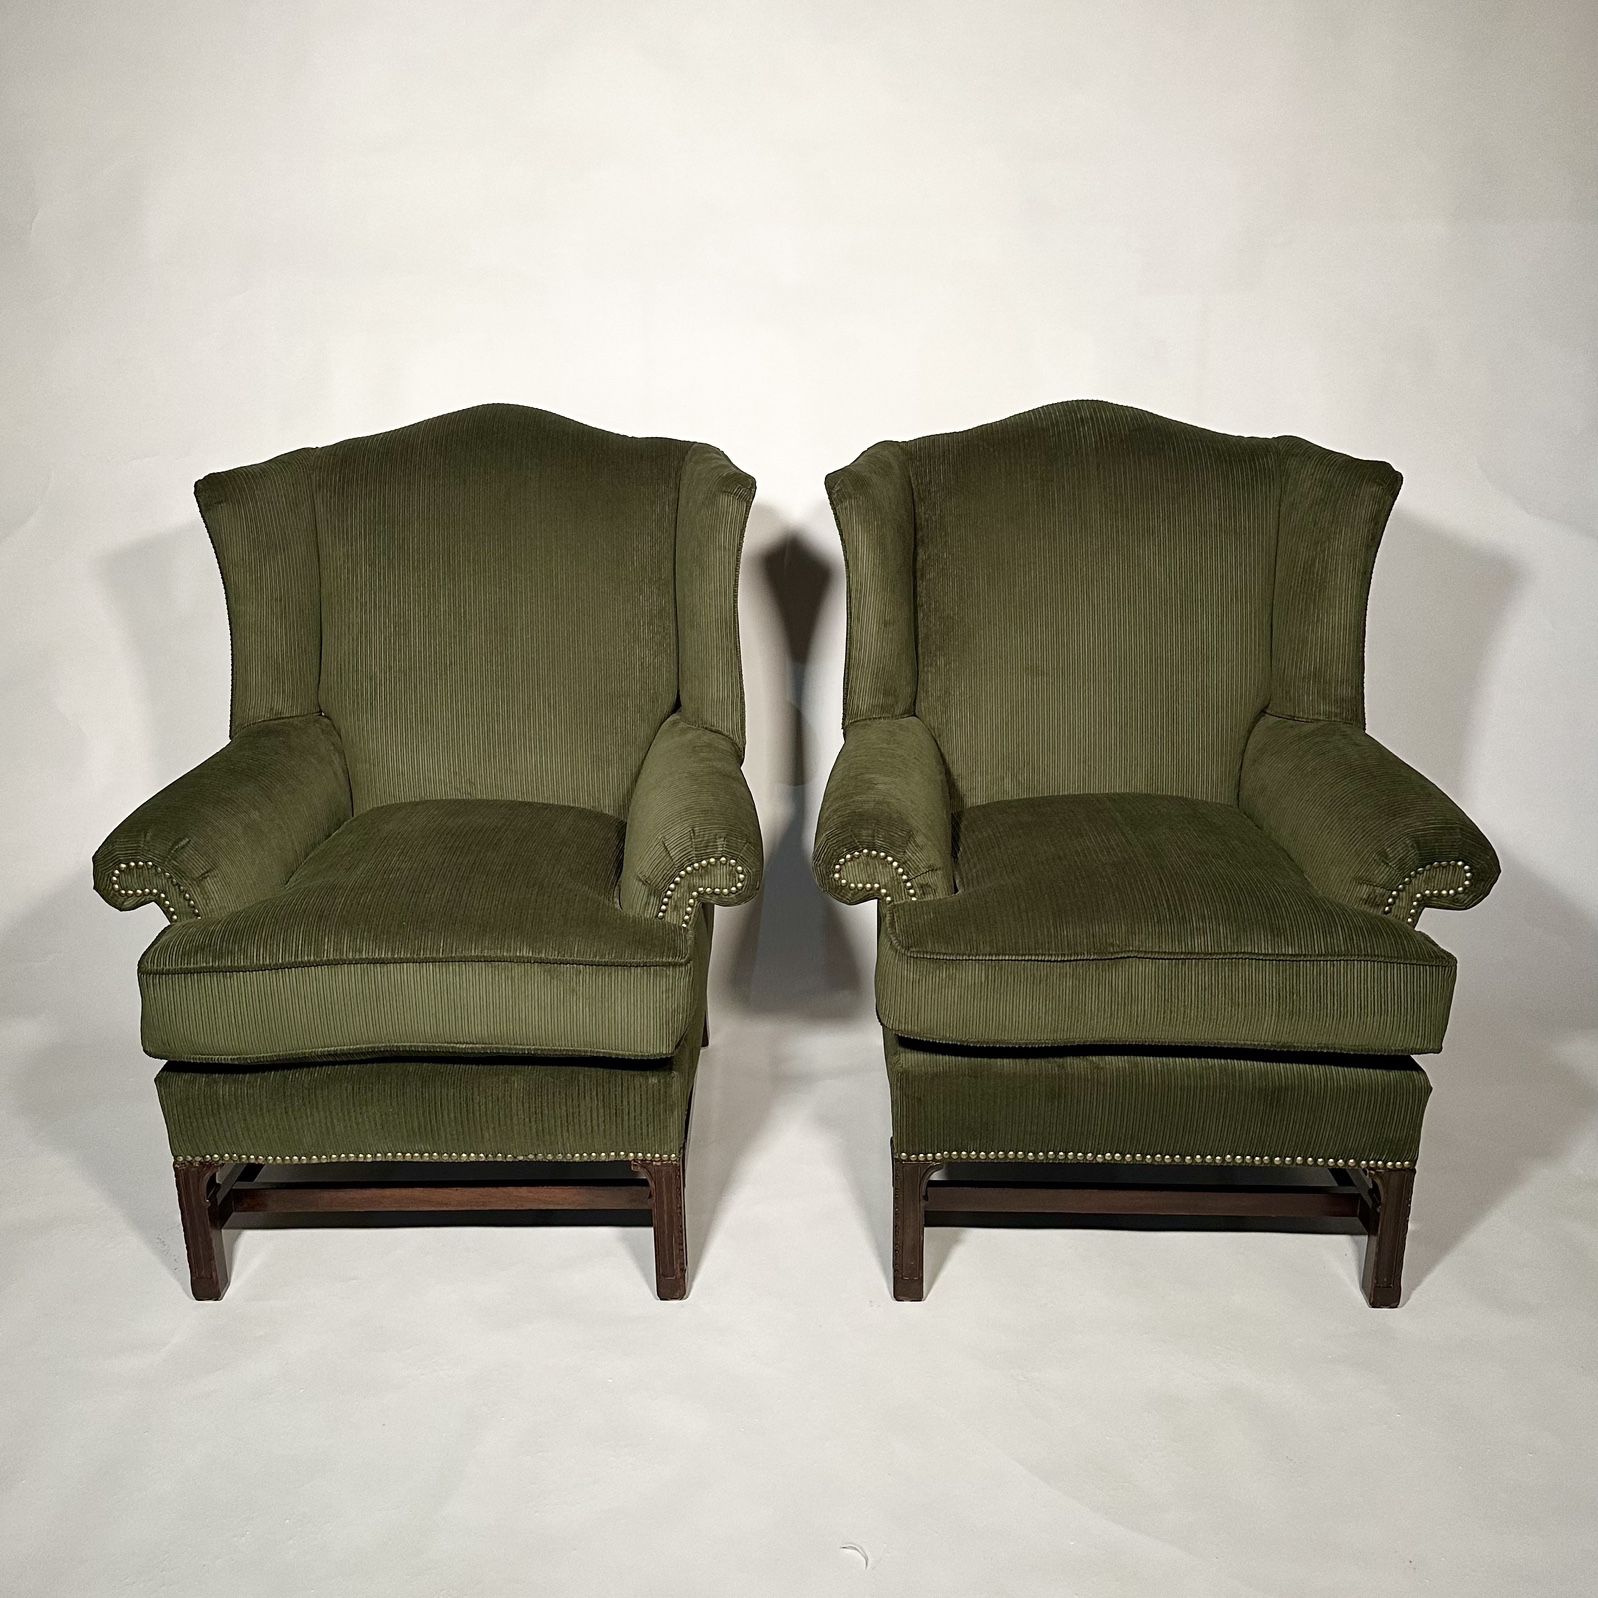 Pair of Vintage Gregorian style Wingback Chairs OBO